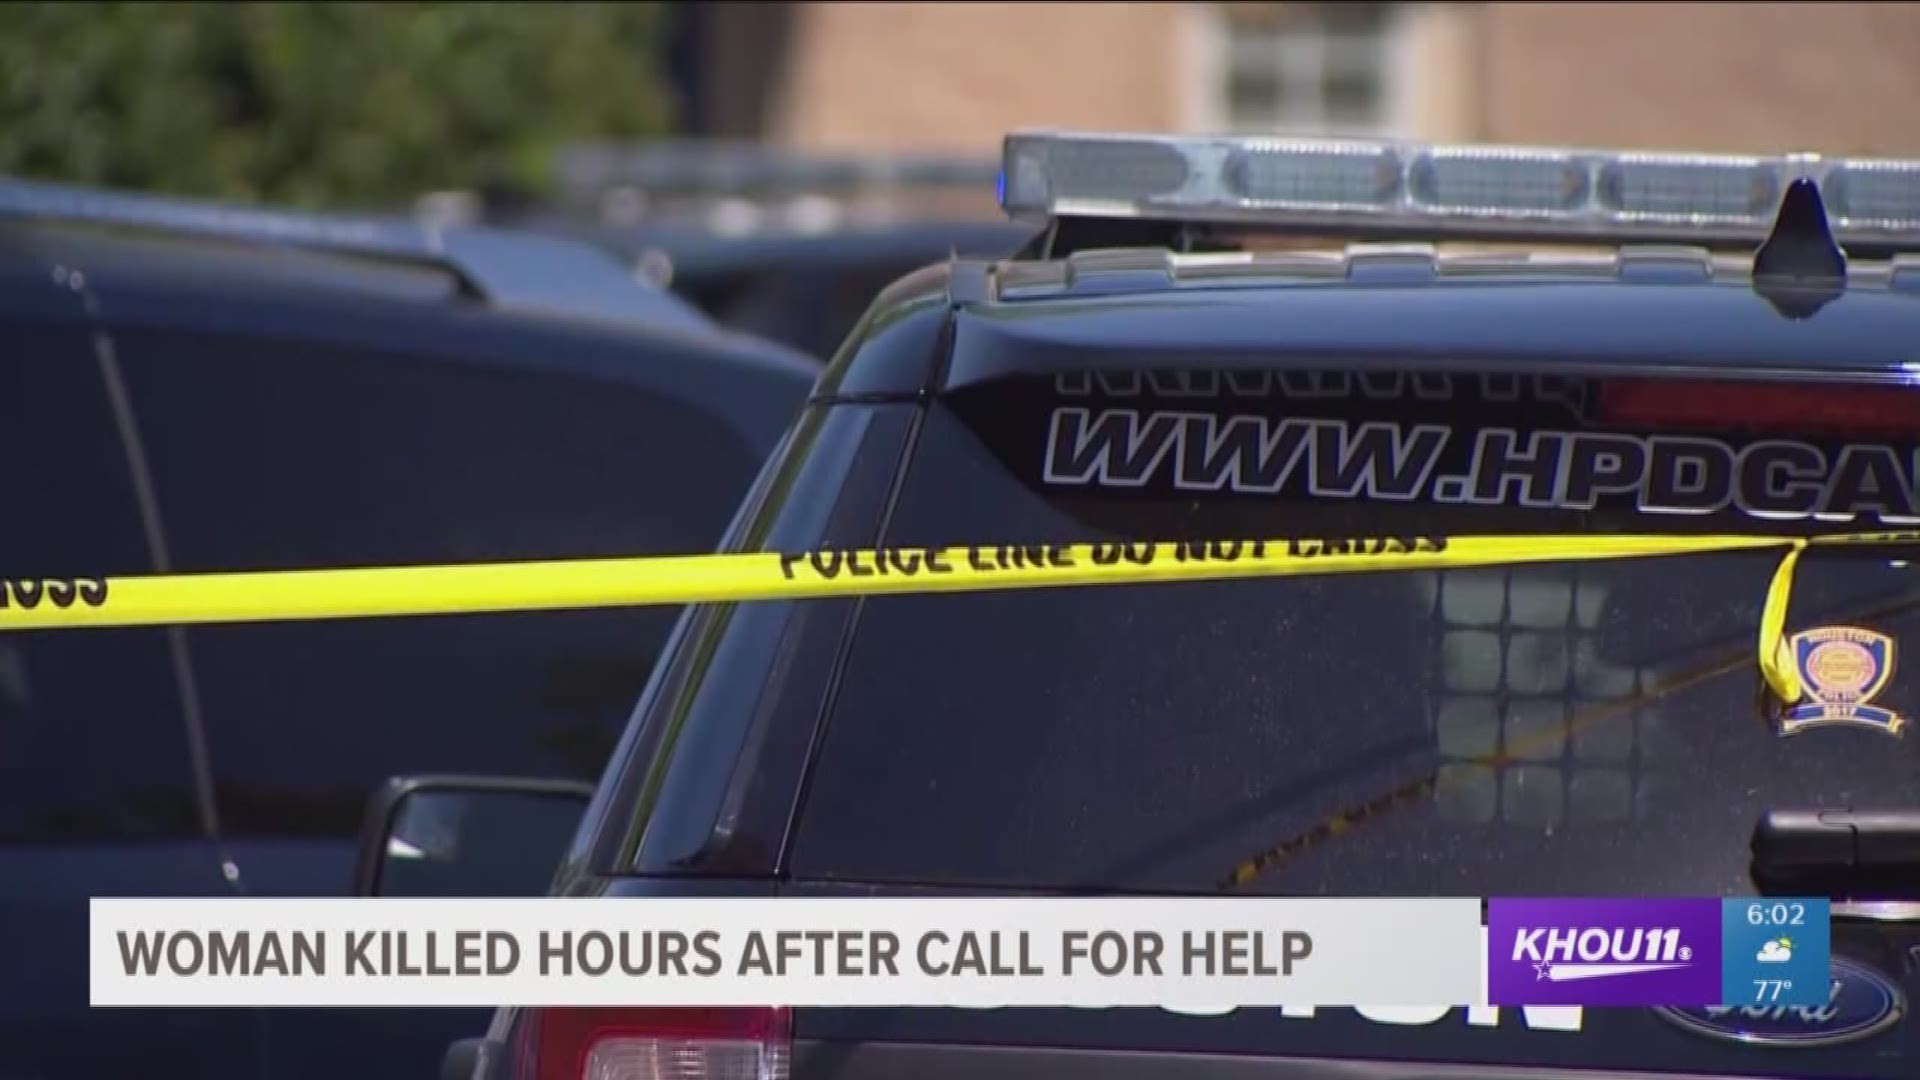 A woman did call police for help but she was killed hours later.